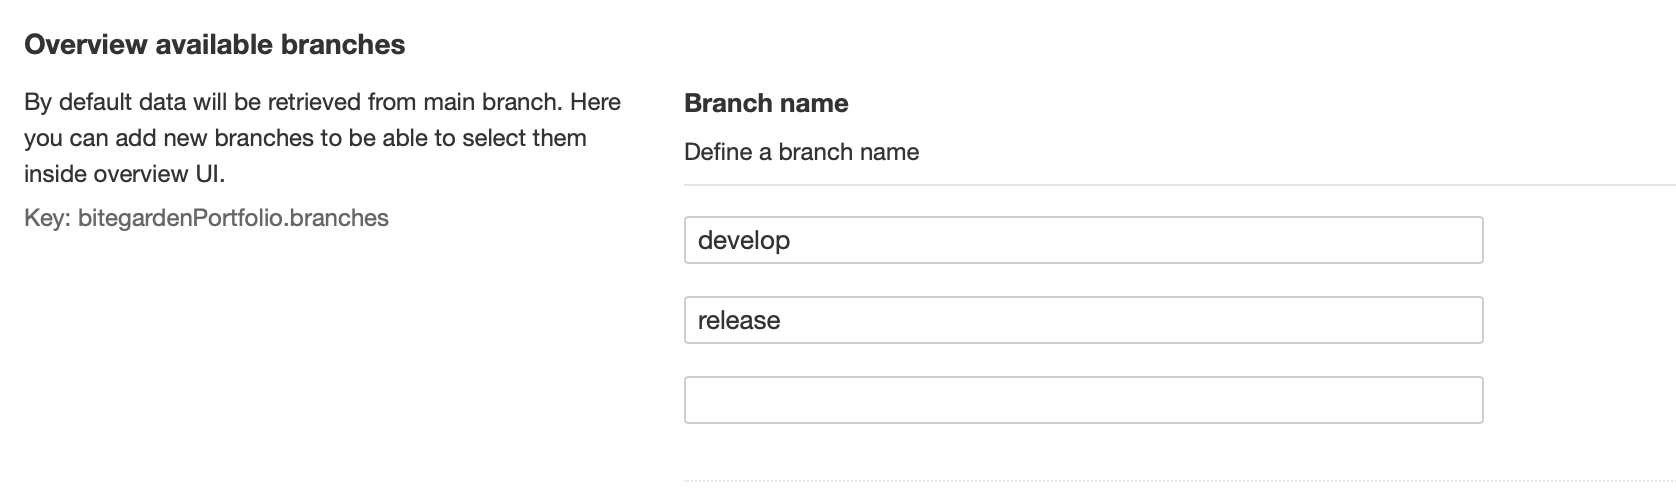 Overview Report Plugin now is supporting branches